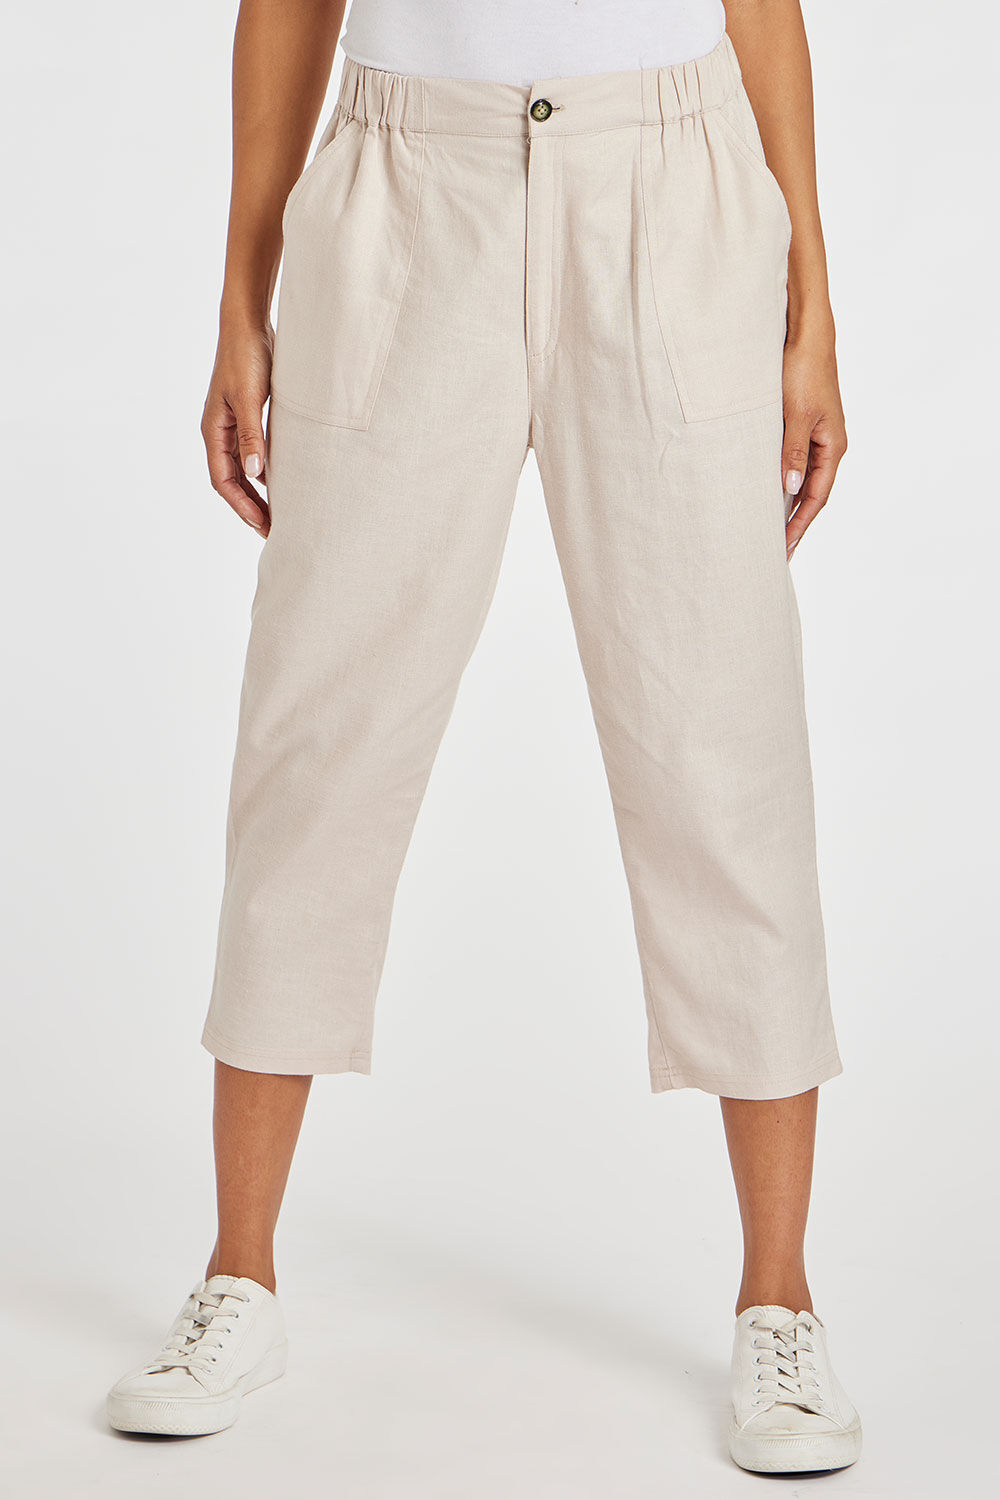 Bonmarche Stone Tapered Cropped Linen Trousers With Button Detail, Size: 14